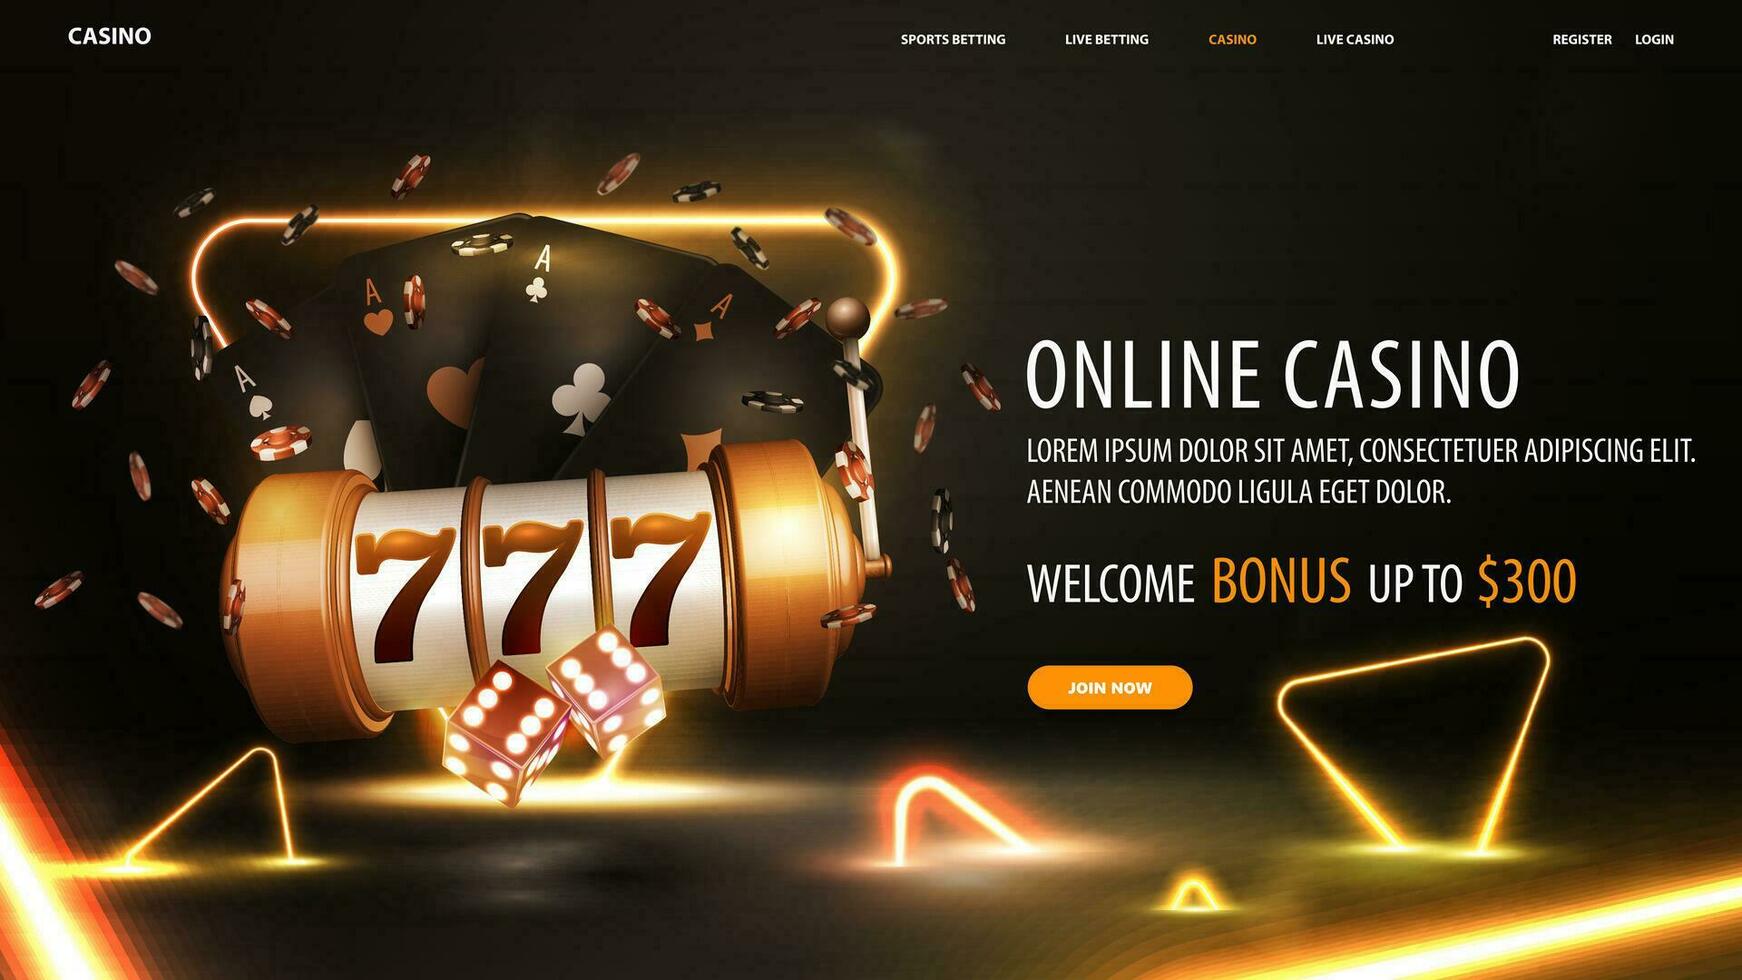 Online casino, welcome bonus, black banner with offer, casino slot machine, dice, black playing cards and gold neon ring in dark scene with gold neon triangles around vector